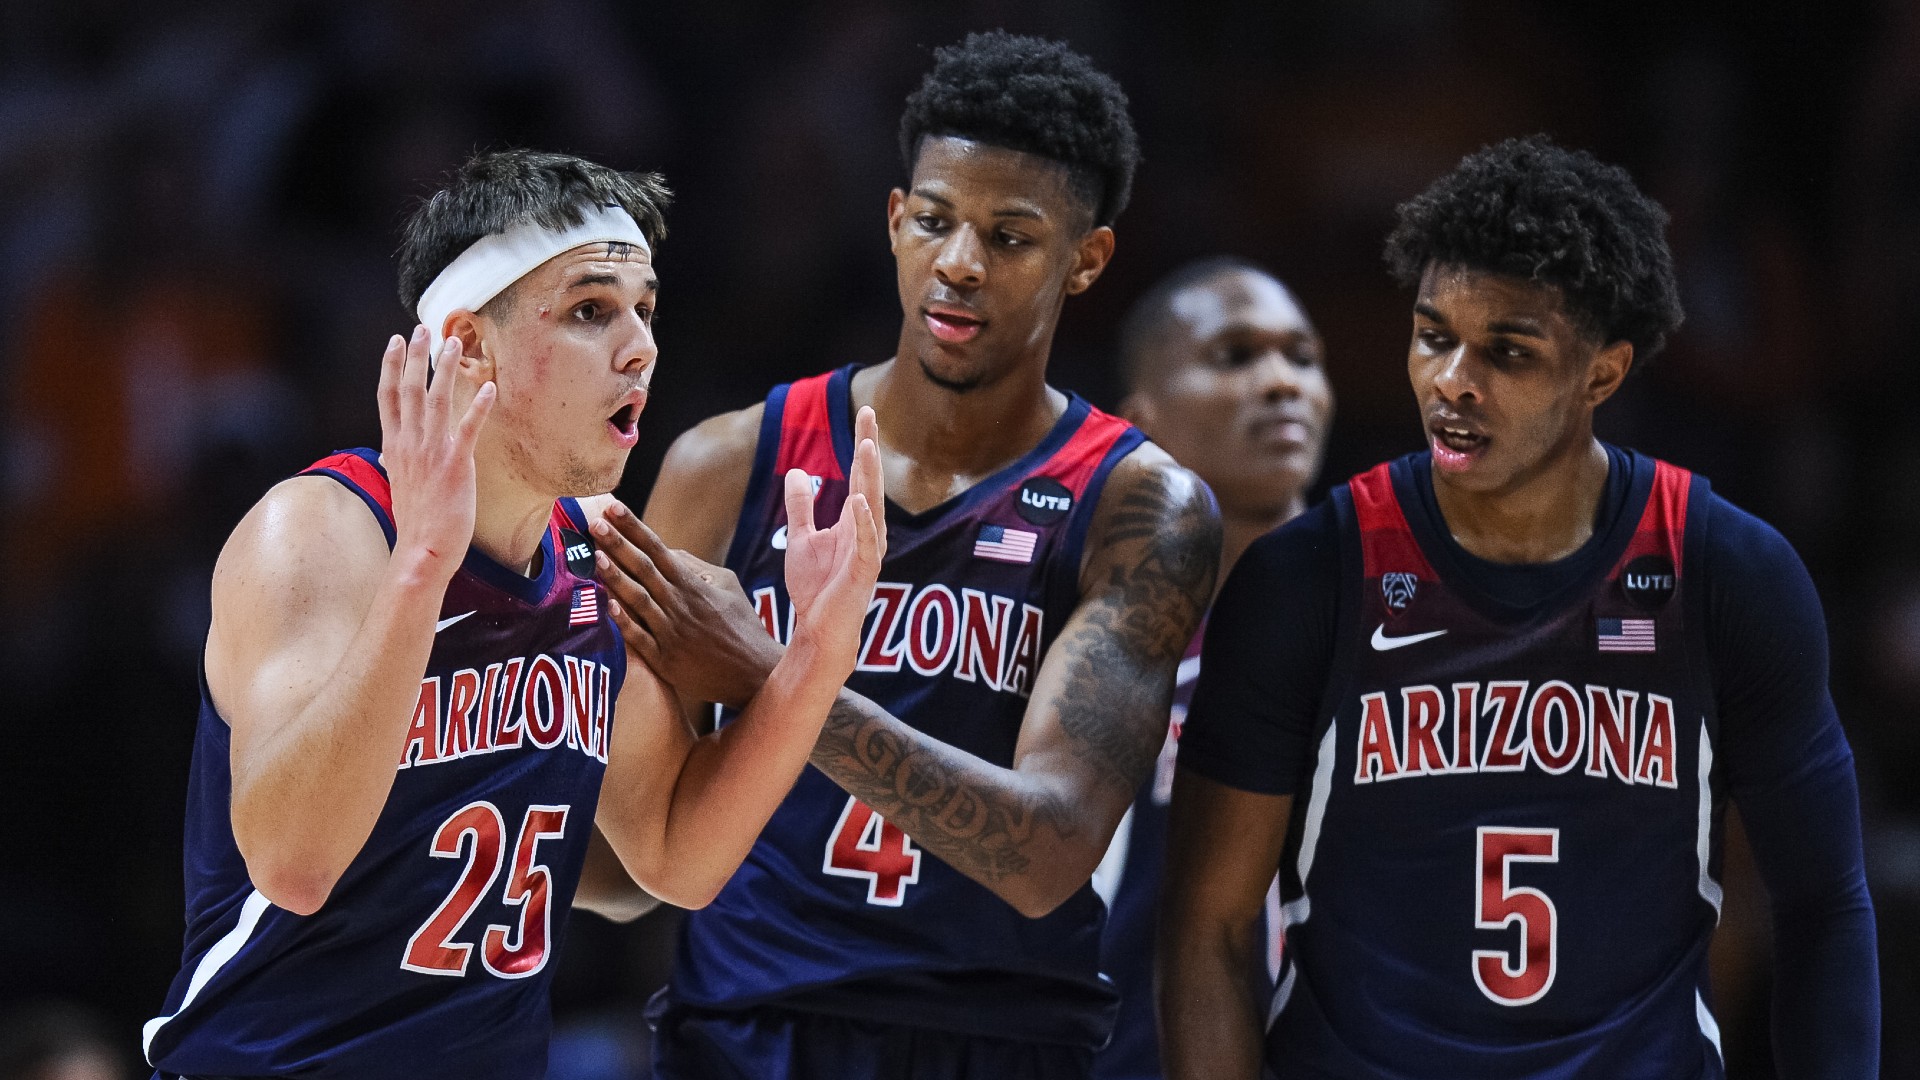 College Basketball Final Four Dark Horse Candidates: Arizona & North Carolina Headline 4 Intriguing Contenders article feature image